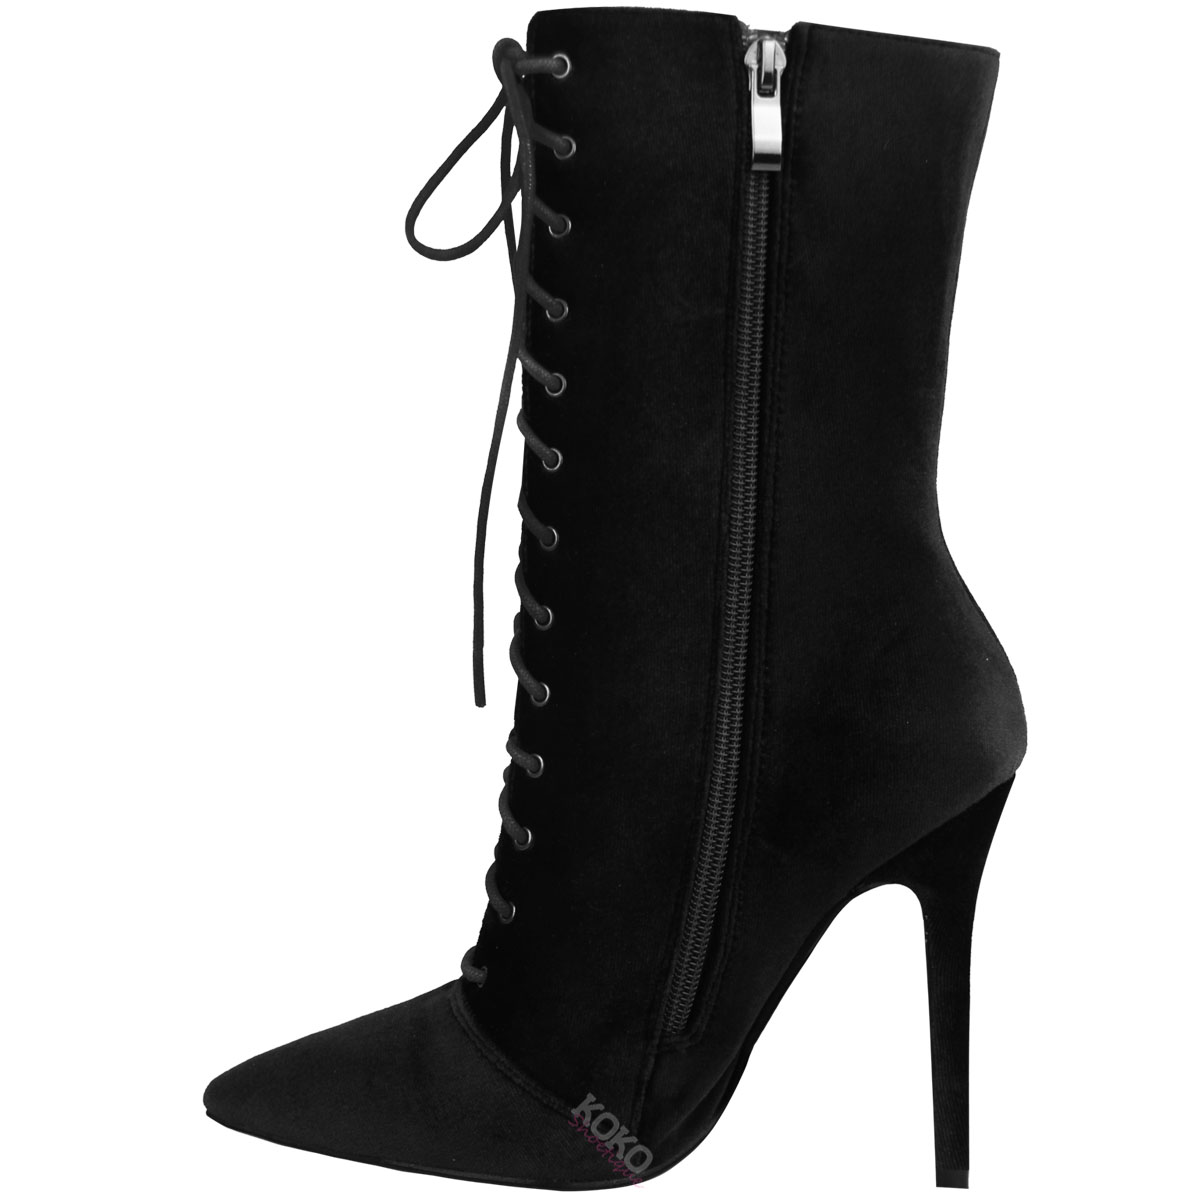 New Womens Ladies Lace Up Velvet High Heel Stiletto Ankle Boots Party ...